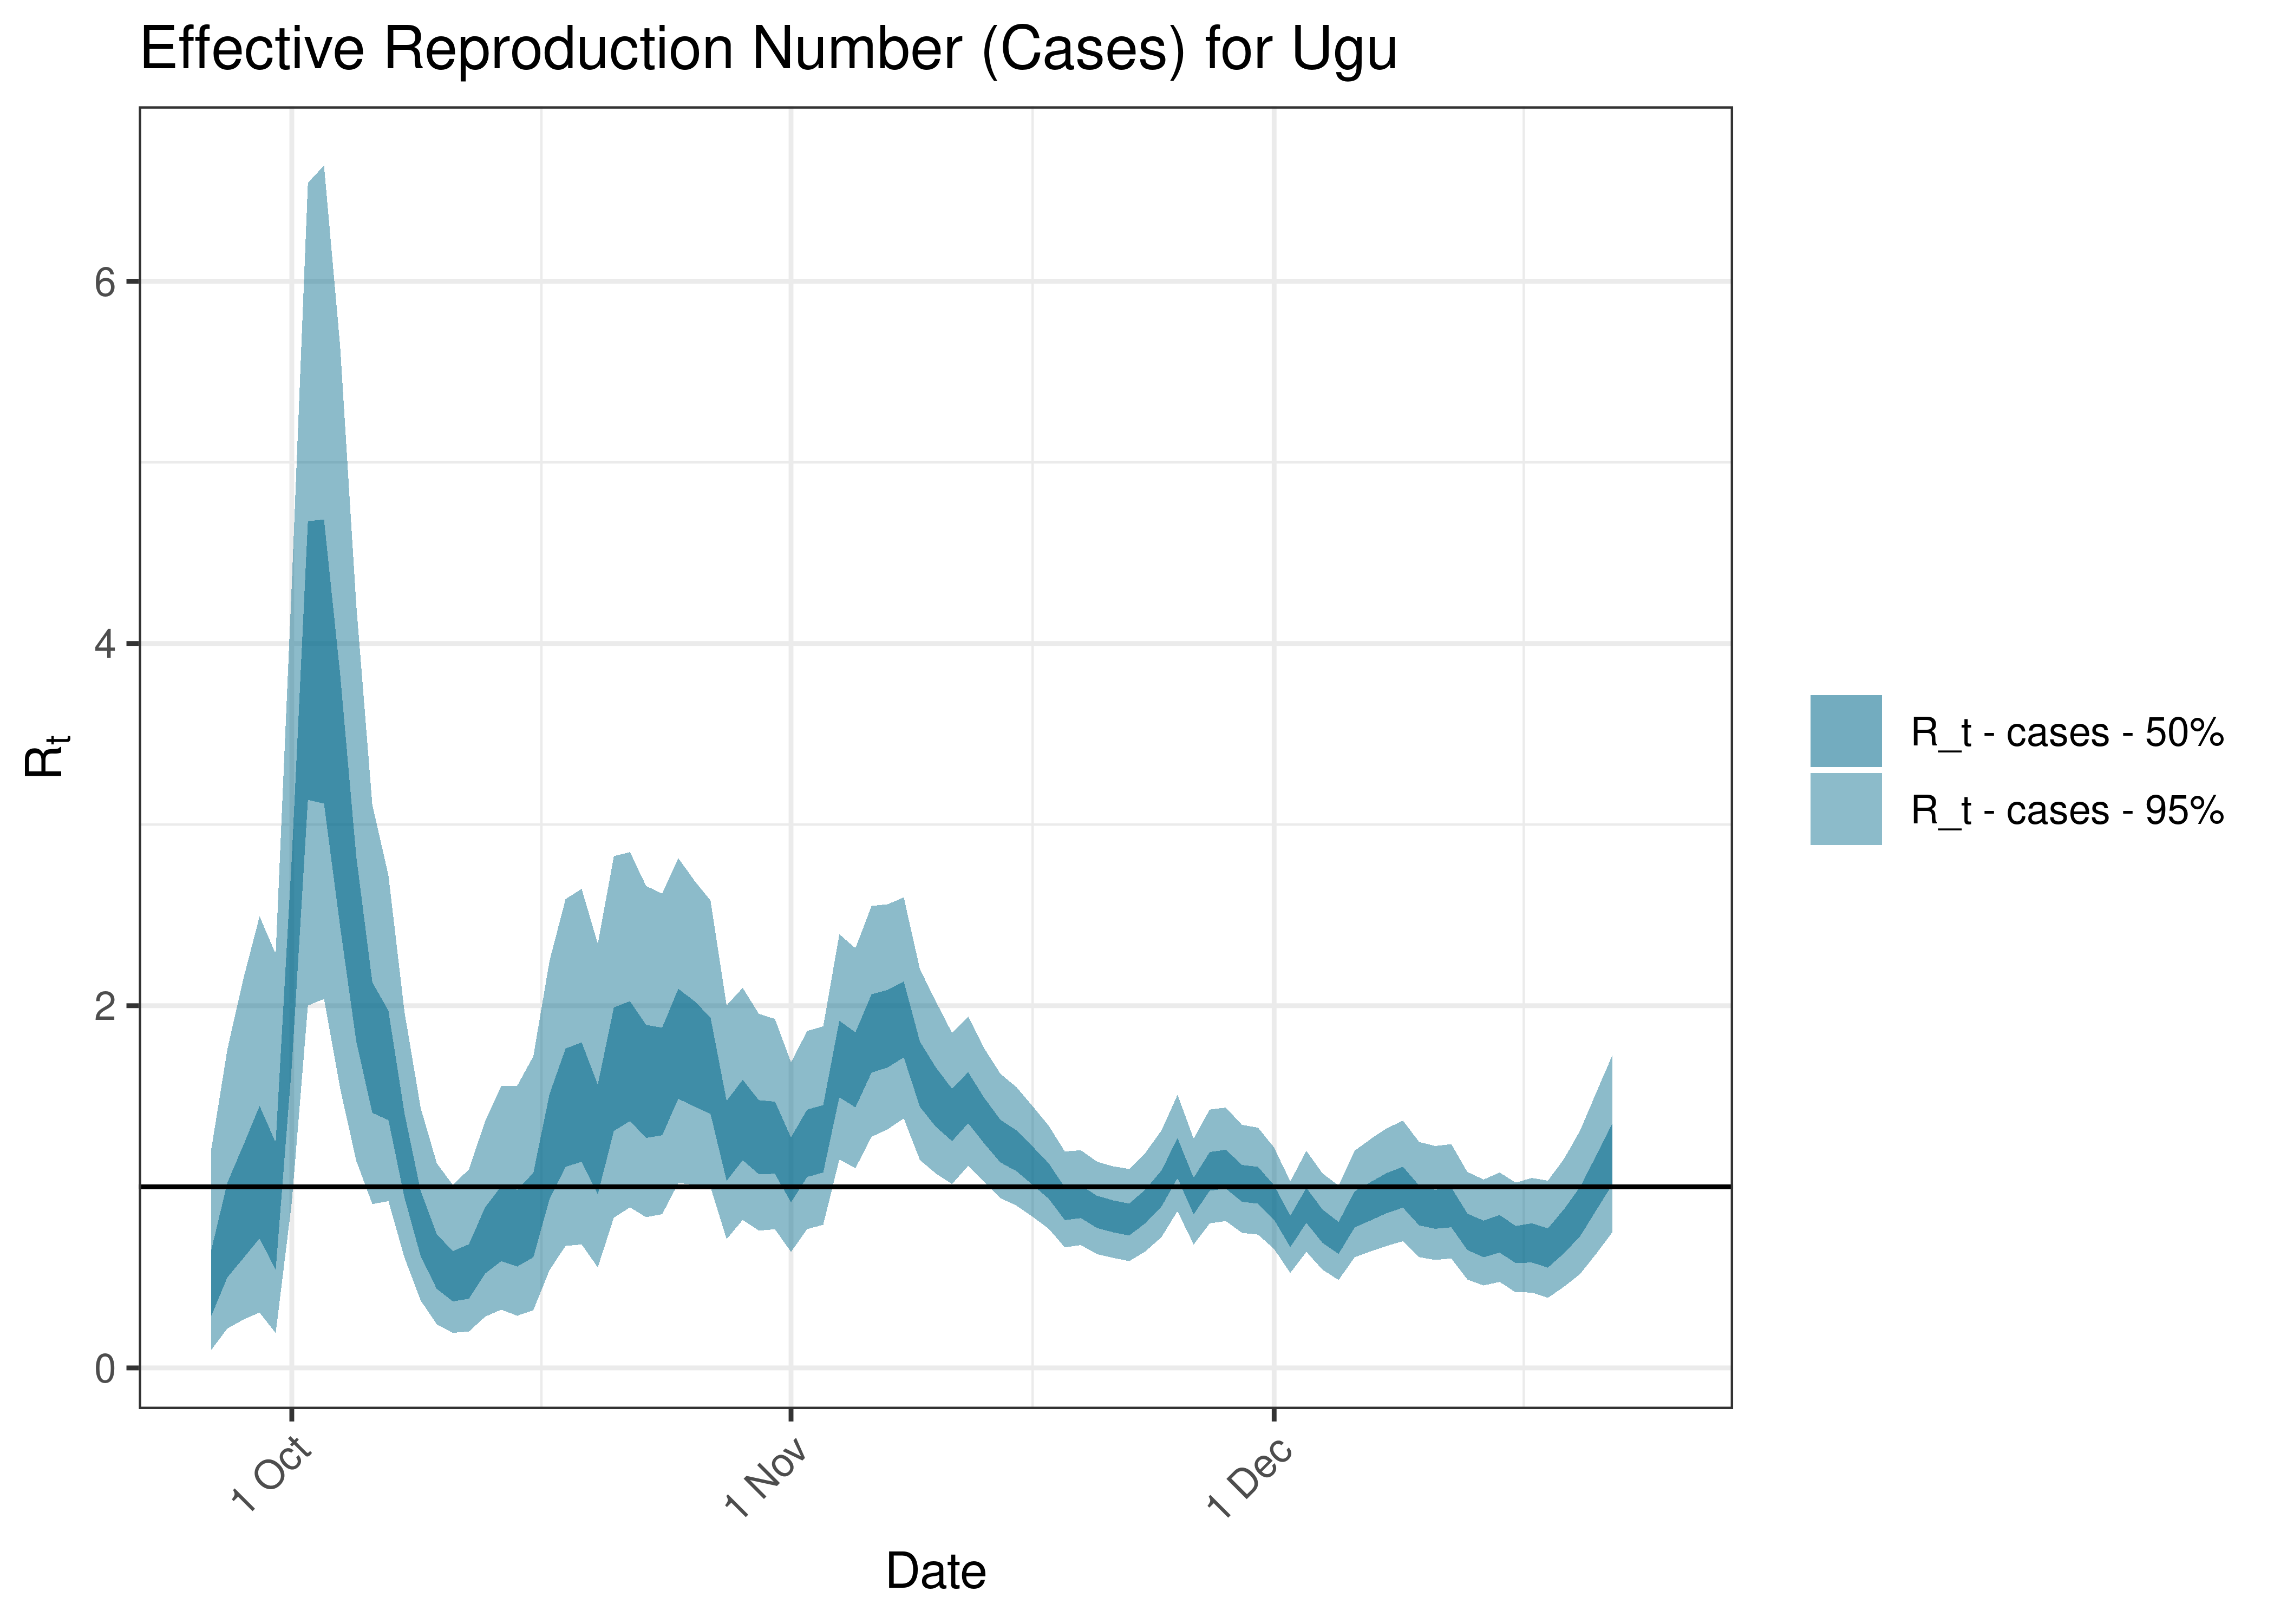 Estimated Effective Reproduction Number Based on Cases for Ugu over last 90 days